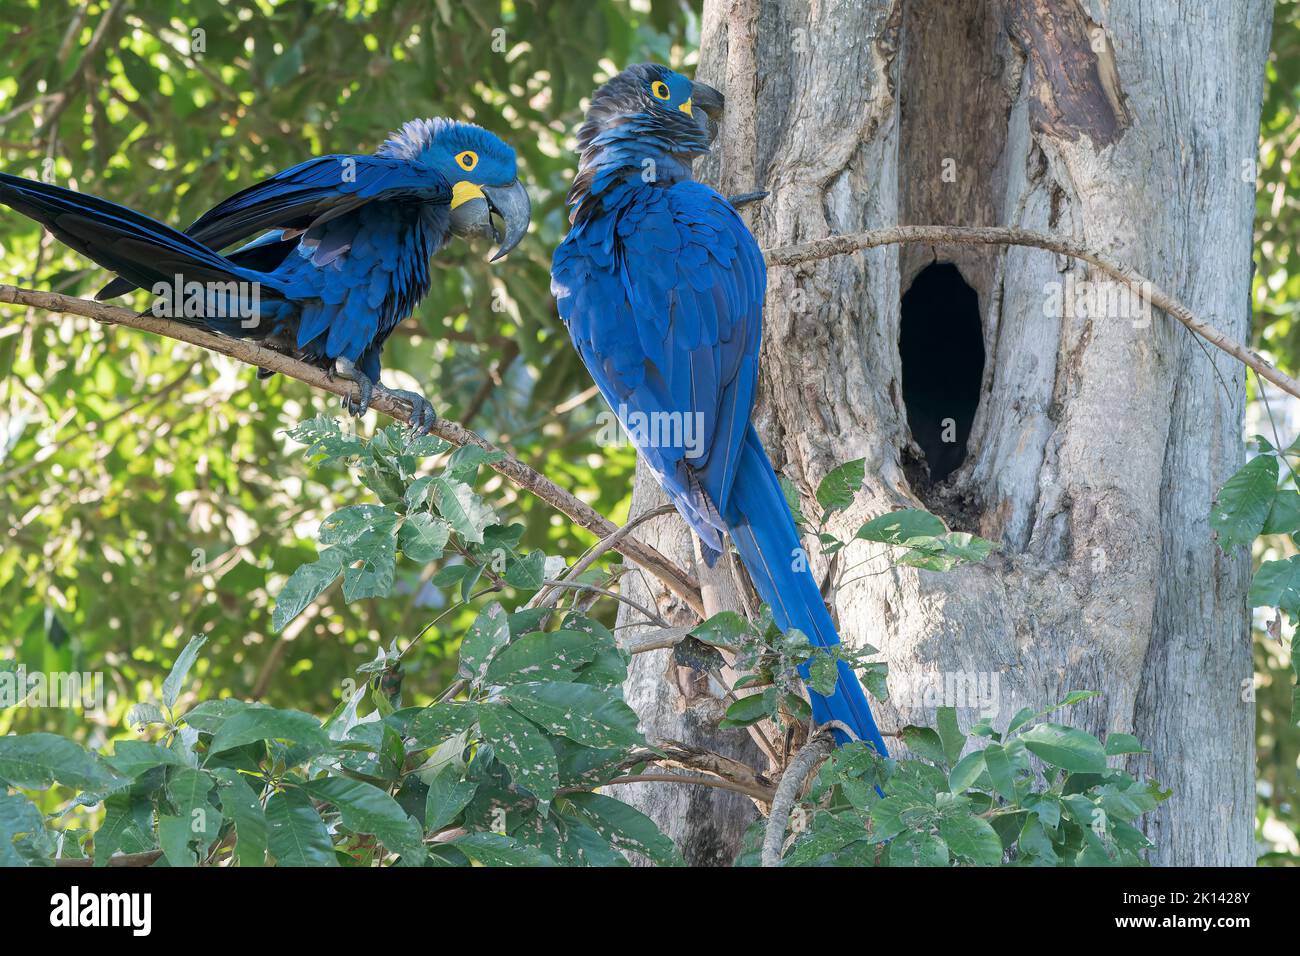 hyacinth parrot or hyacinthine parrot, Anodorhynchus hyacinthinus, two adults perched in tree near nest hole, Pantanal, Brazil Stock Photo